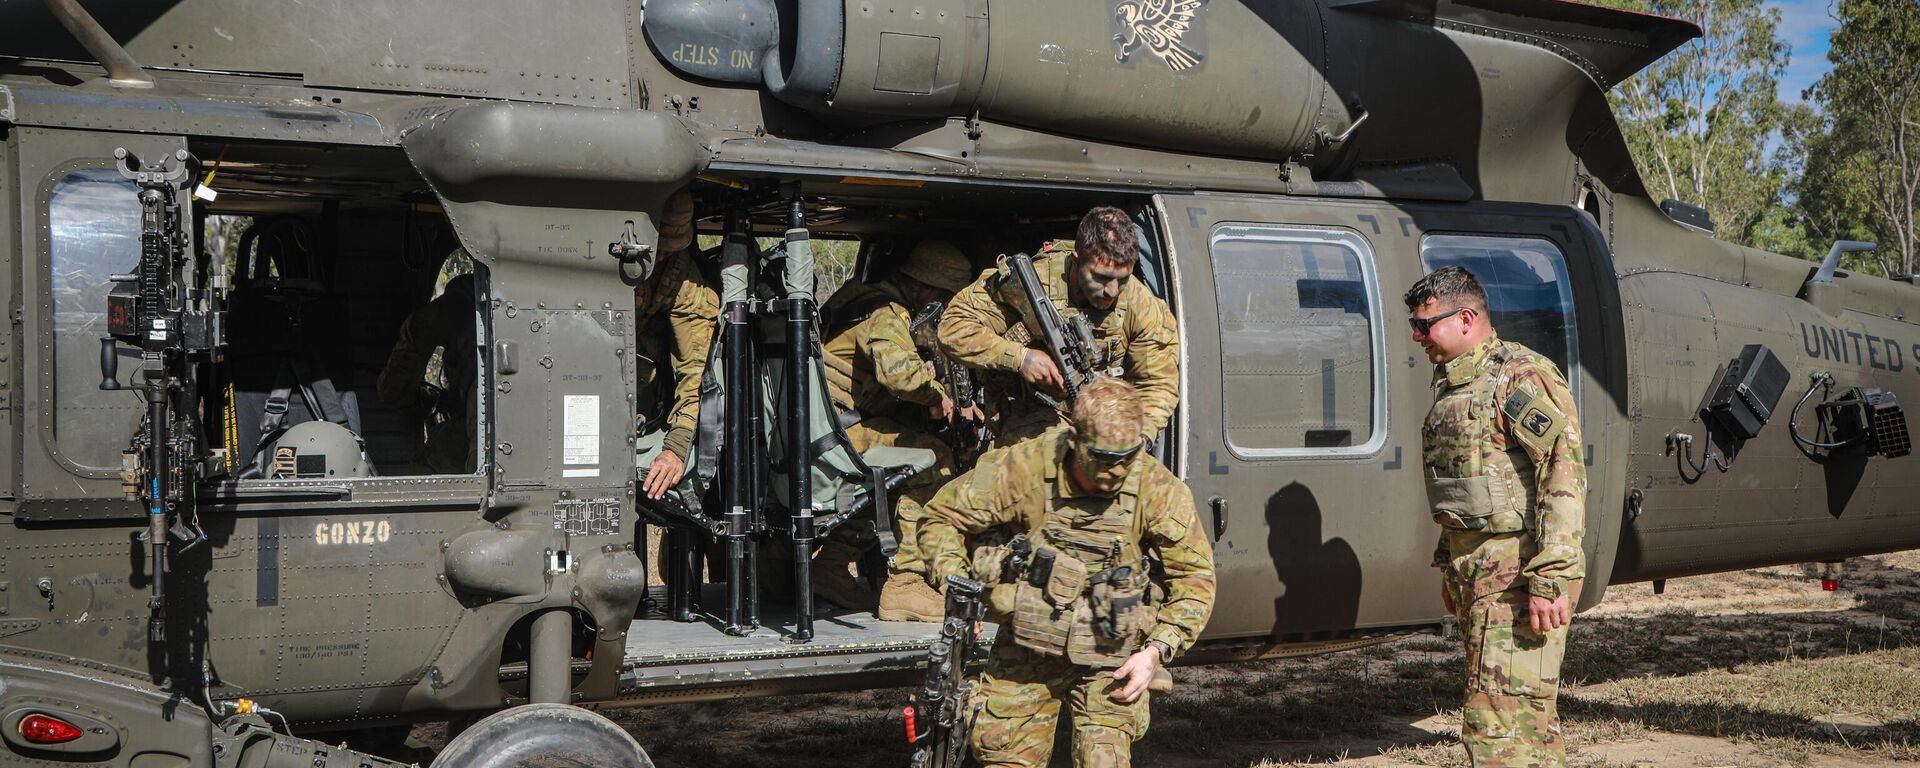 Sgt. Louis Ortiz, 16th Combat Aviation Brigade, Task Force Warhawk, Battle Group Griffin, evaluates Soldiers from the Australian Defence Force (ADF) as they exit an UH-60 Black Hawk assigned to 16th CAB during hot/cold loading training, as a part of Exercise Talisman saber in an ADF training area outside of Townsville, Queensland, Australia, July 22, 2023. - Sputnik International, 1920, 24.07.2023